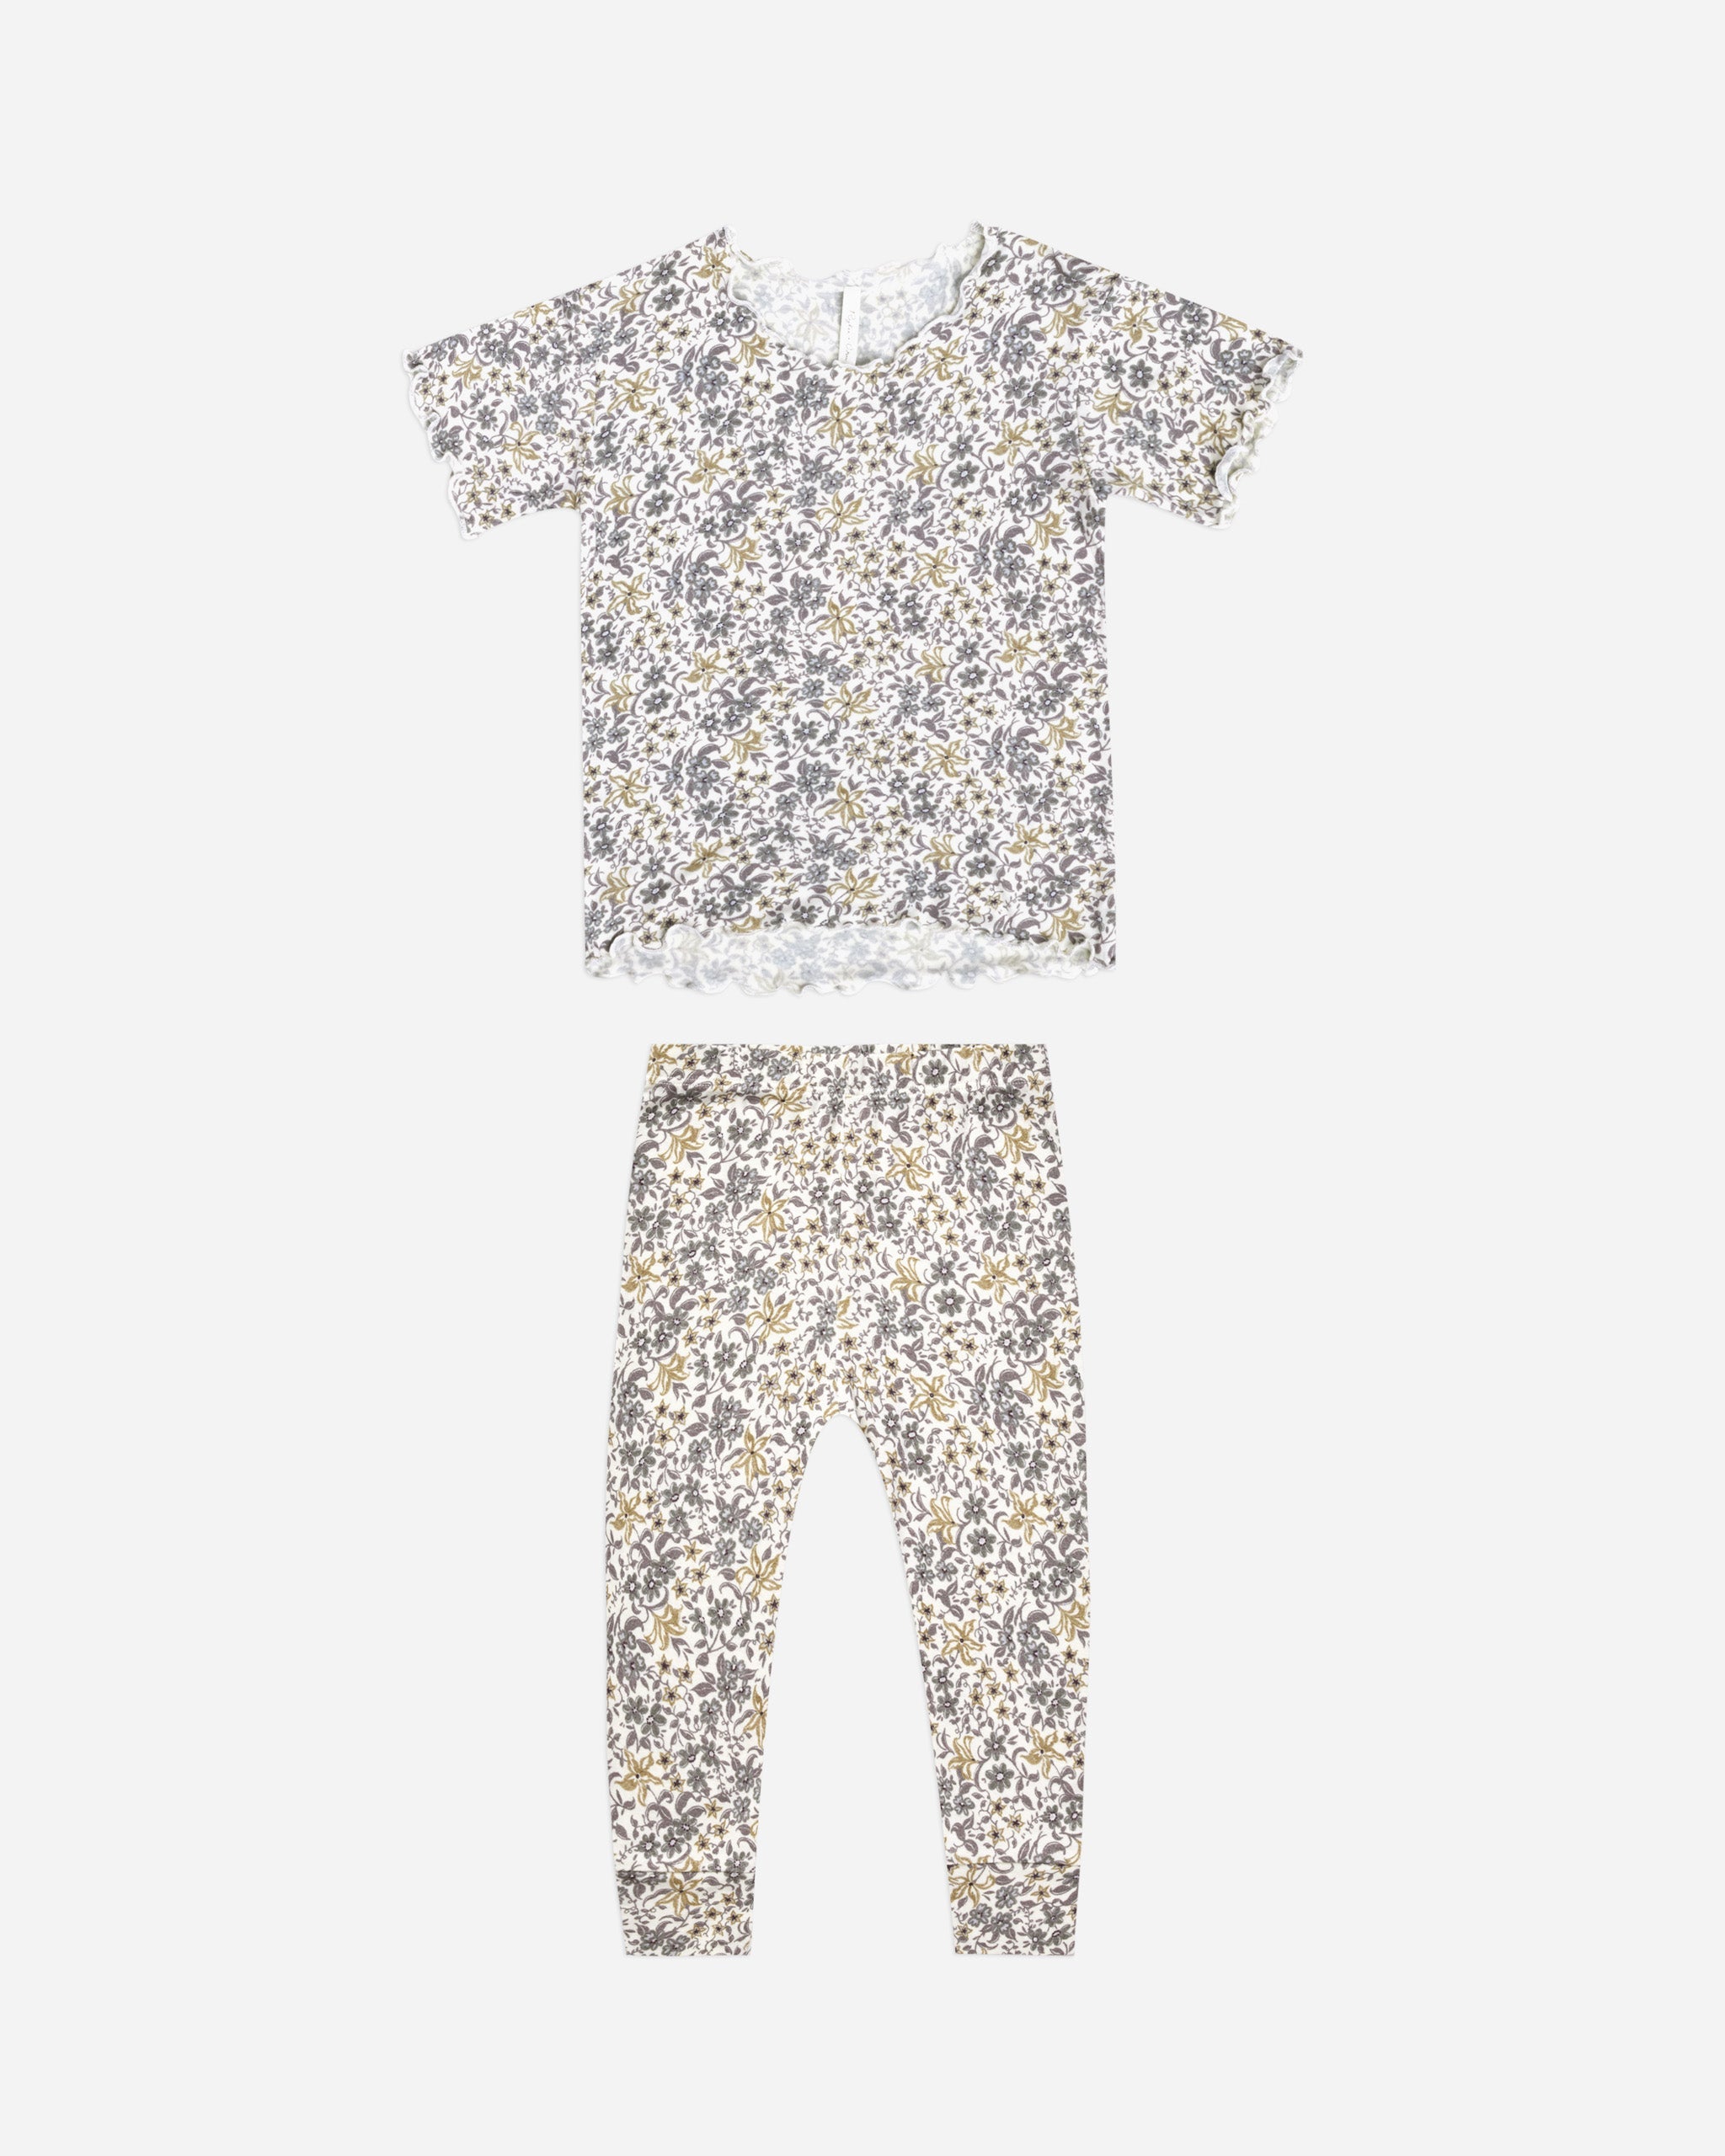 summer modal PJ set || blue floral - Rylee + Cru | Kids Clothes | Trendy Baby Clothes | Modern Infant Outfits |